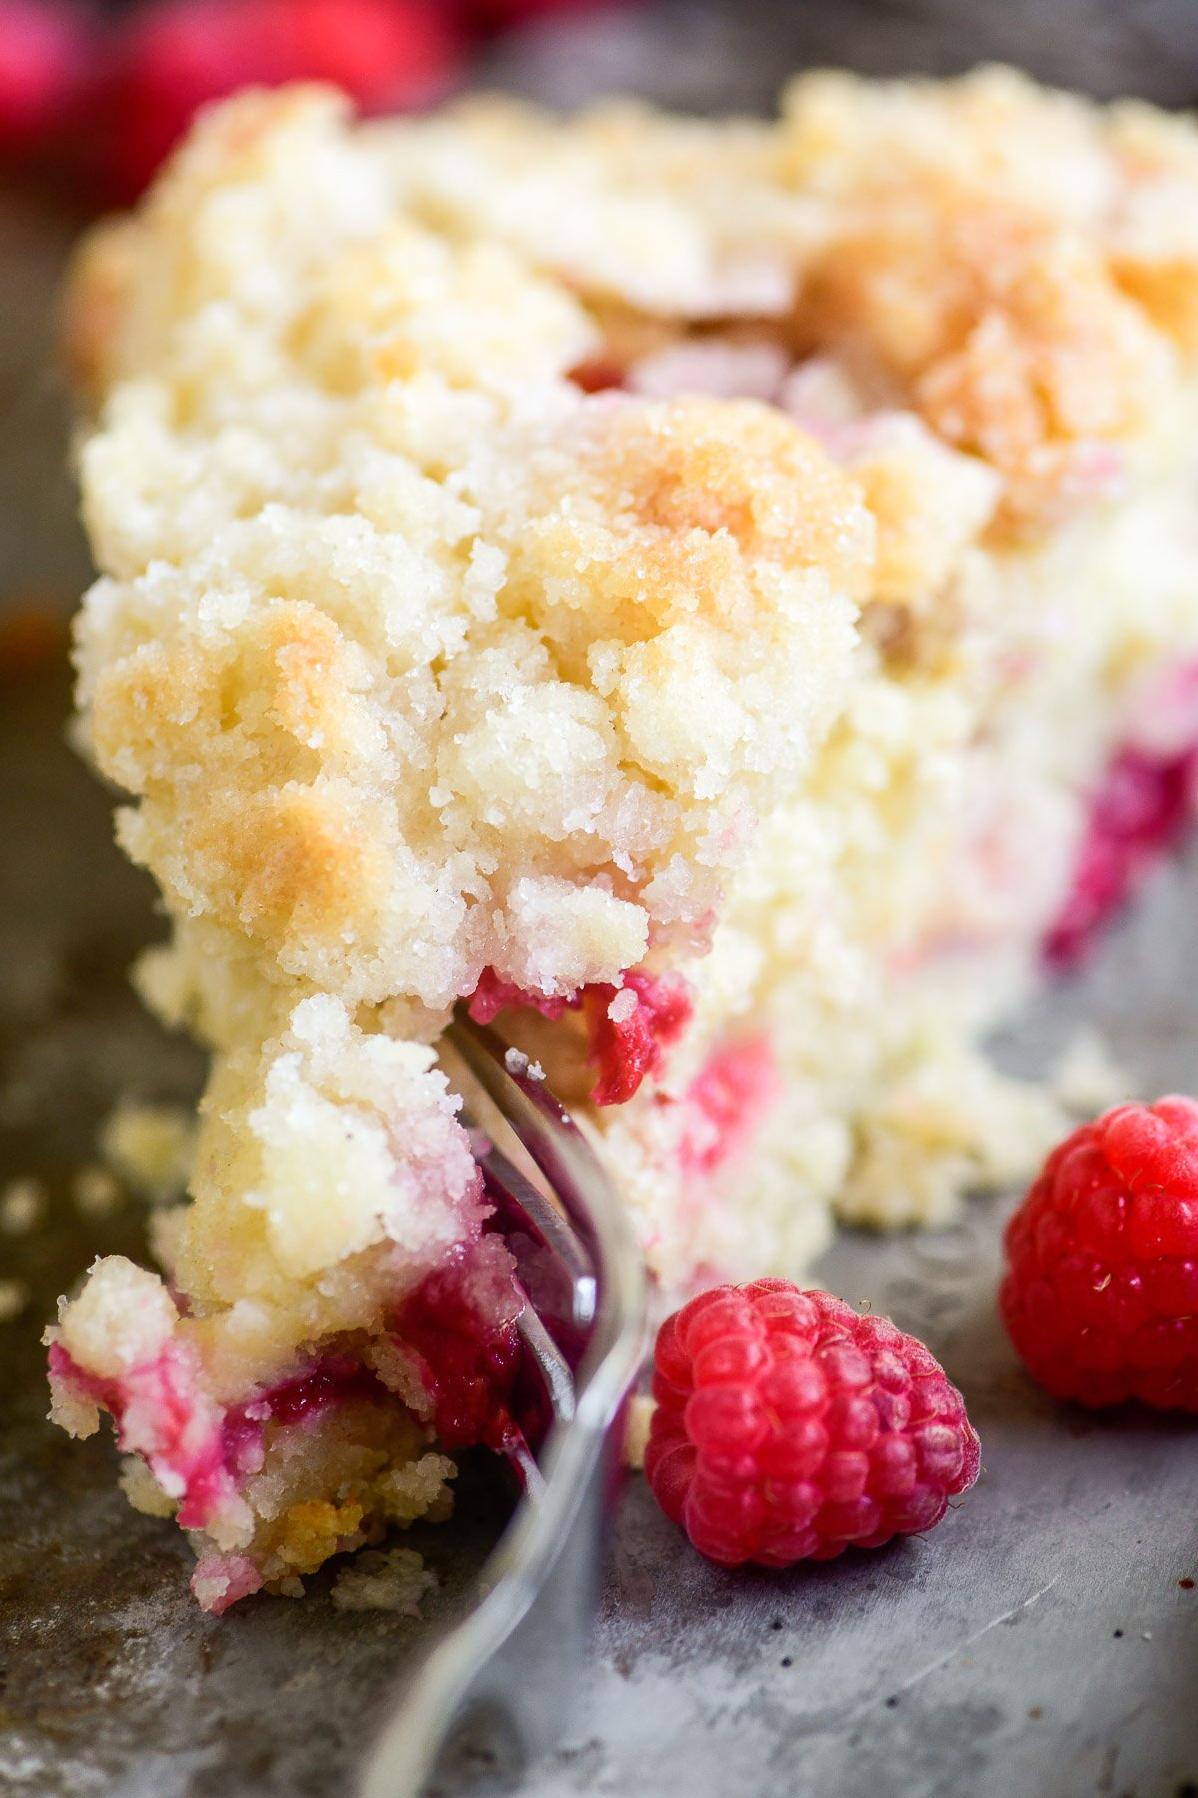  Craving something sweet for your morning coffee? Meet the Raspberry-Oat Coffee Cake! 😋